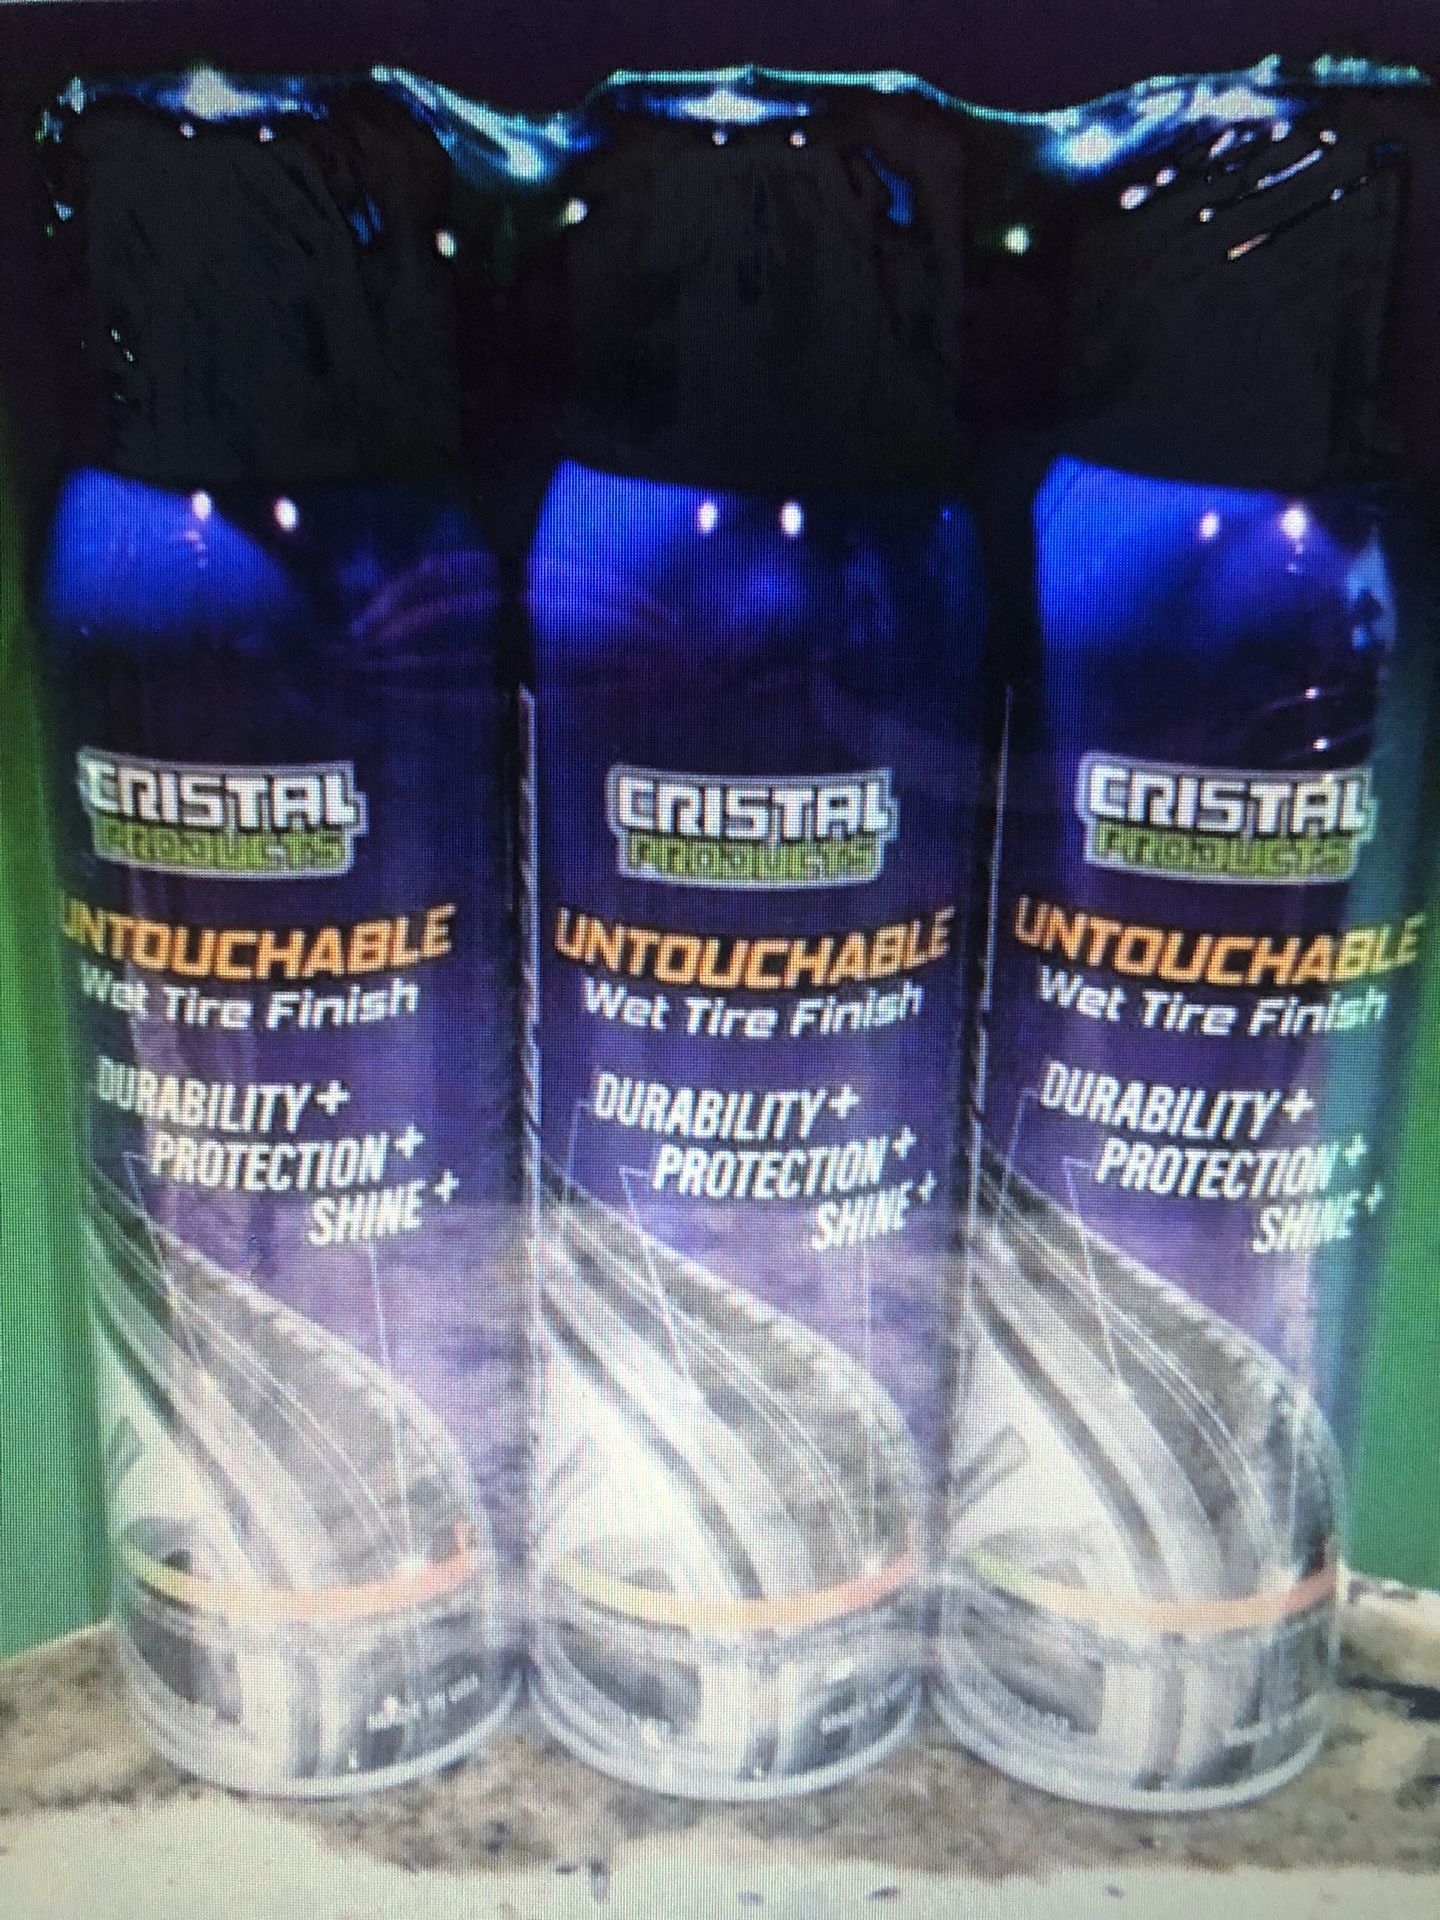 3 Spray Cans Of Cristal Products Untouchable Wet Tire Finish for